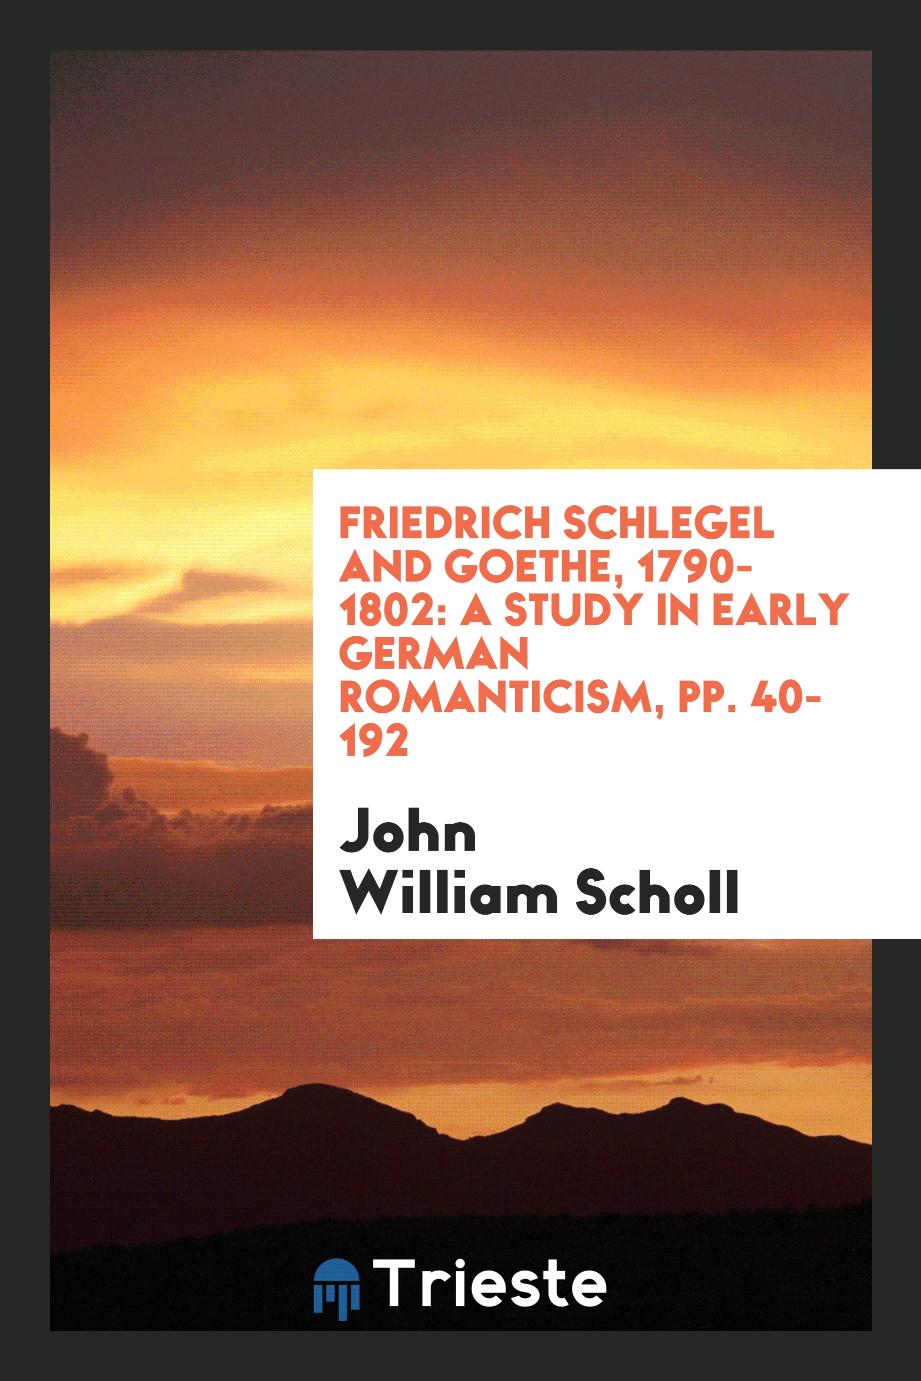 Friedrich Schlegel and Goethe, 1790-1802: A Study in Early German Romanticism, pp. 40-192